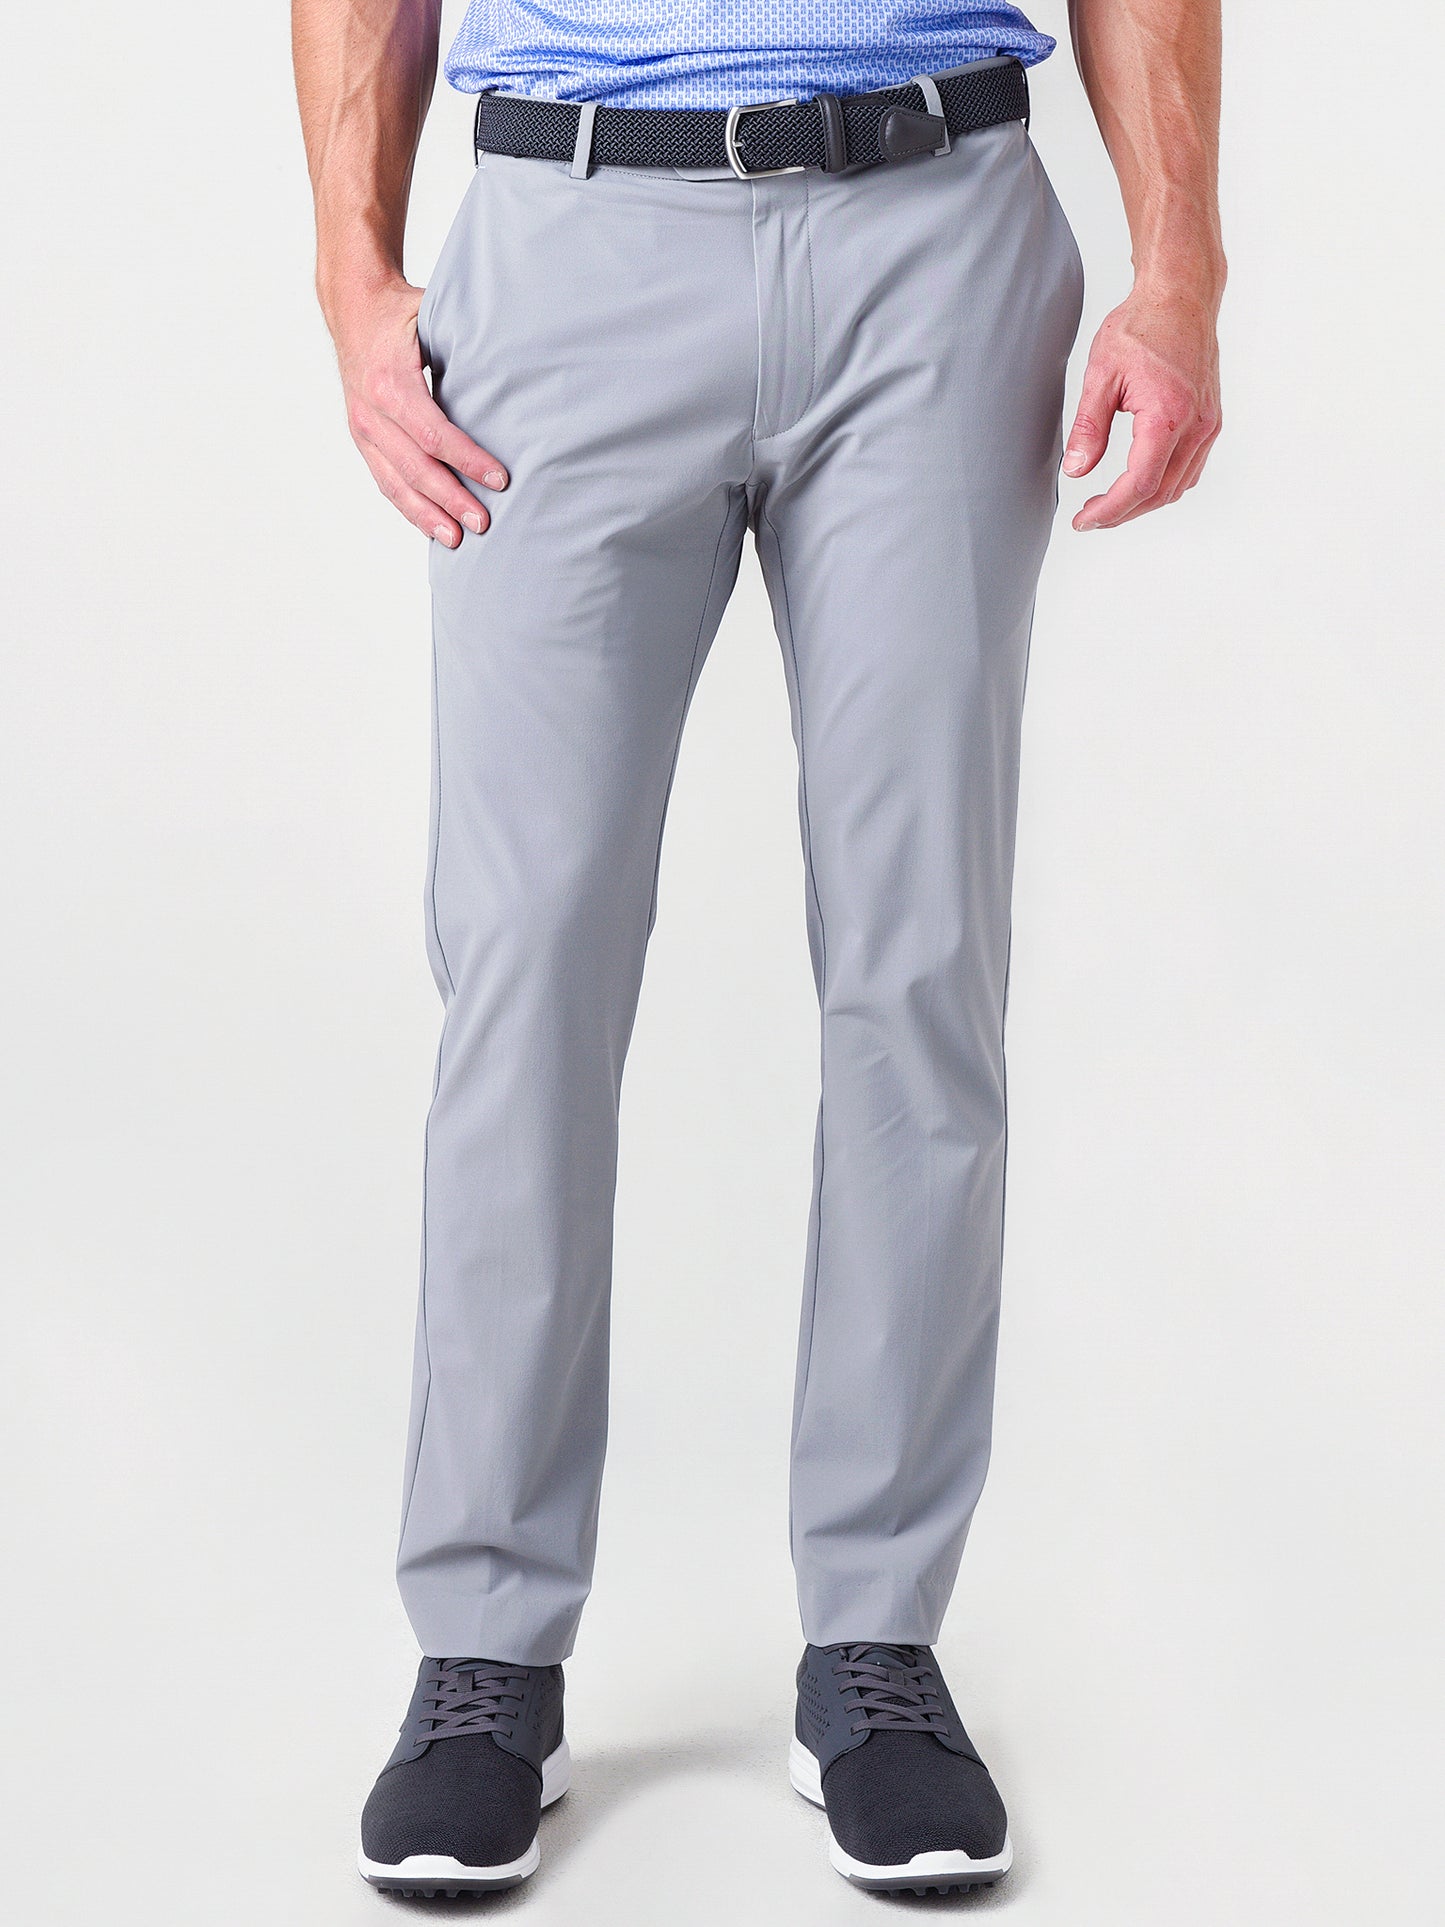 Peter Millar Crown Crafted Stealth Performance Golf Pants 40 X 32